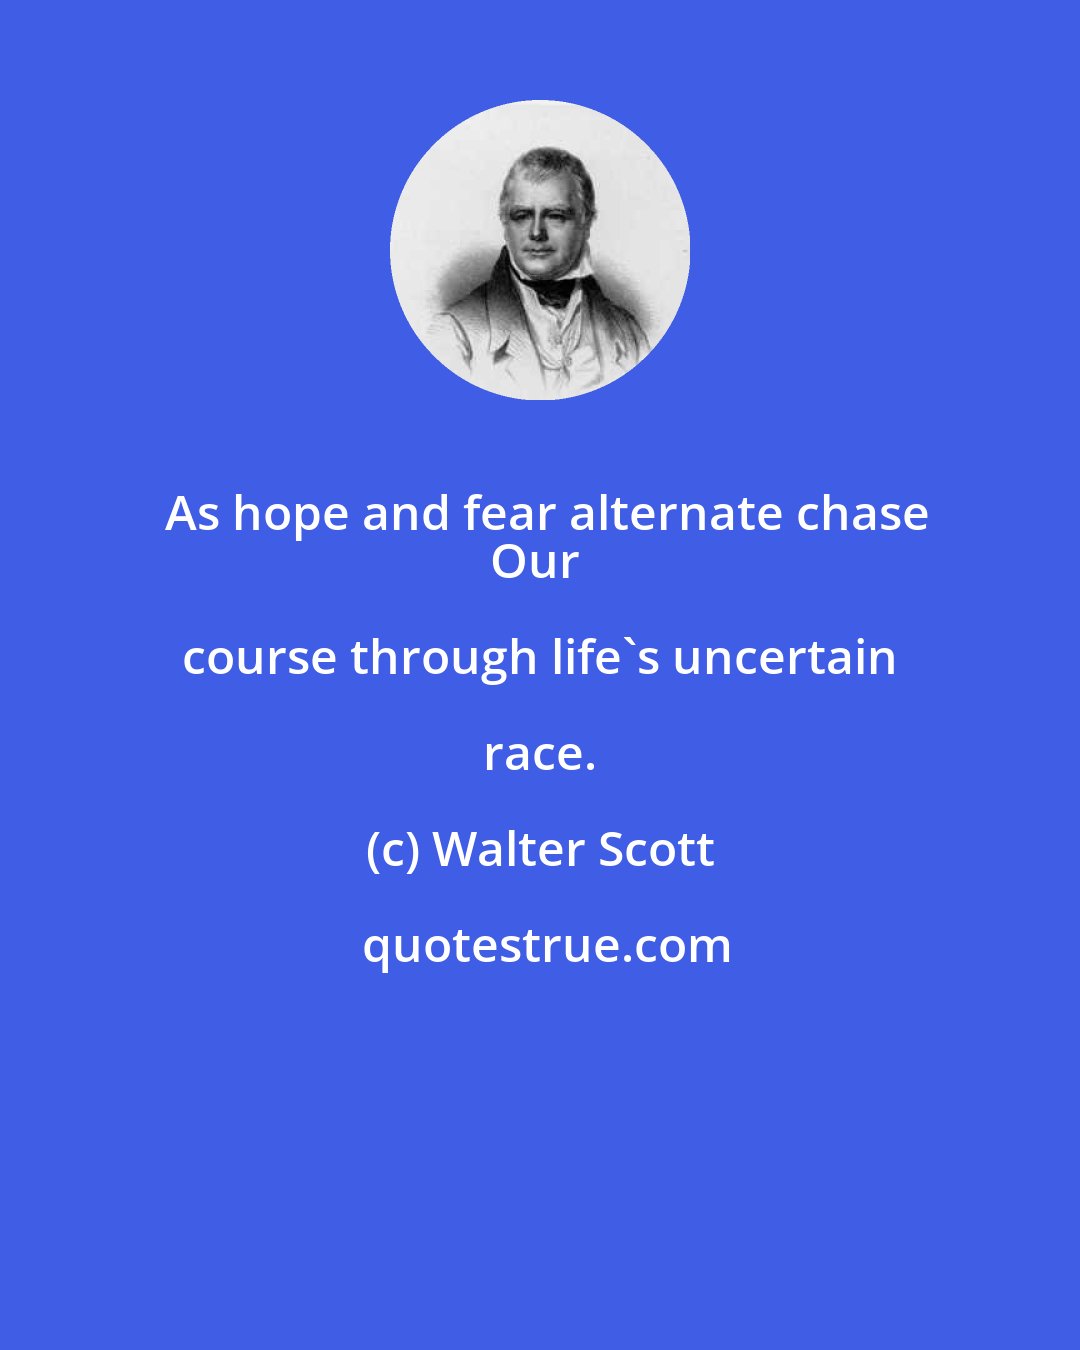 Walter Scott: As hope and fear alternate chase
Our course through life's uncertain race.